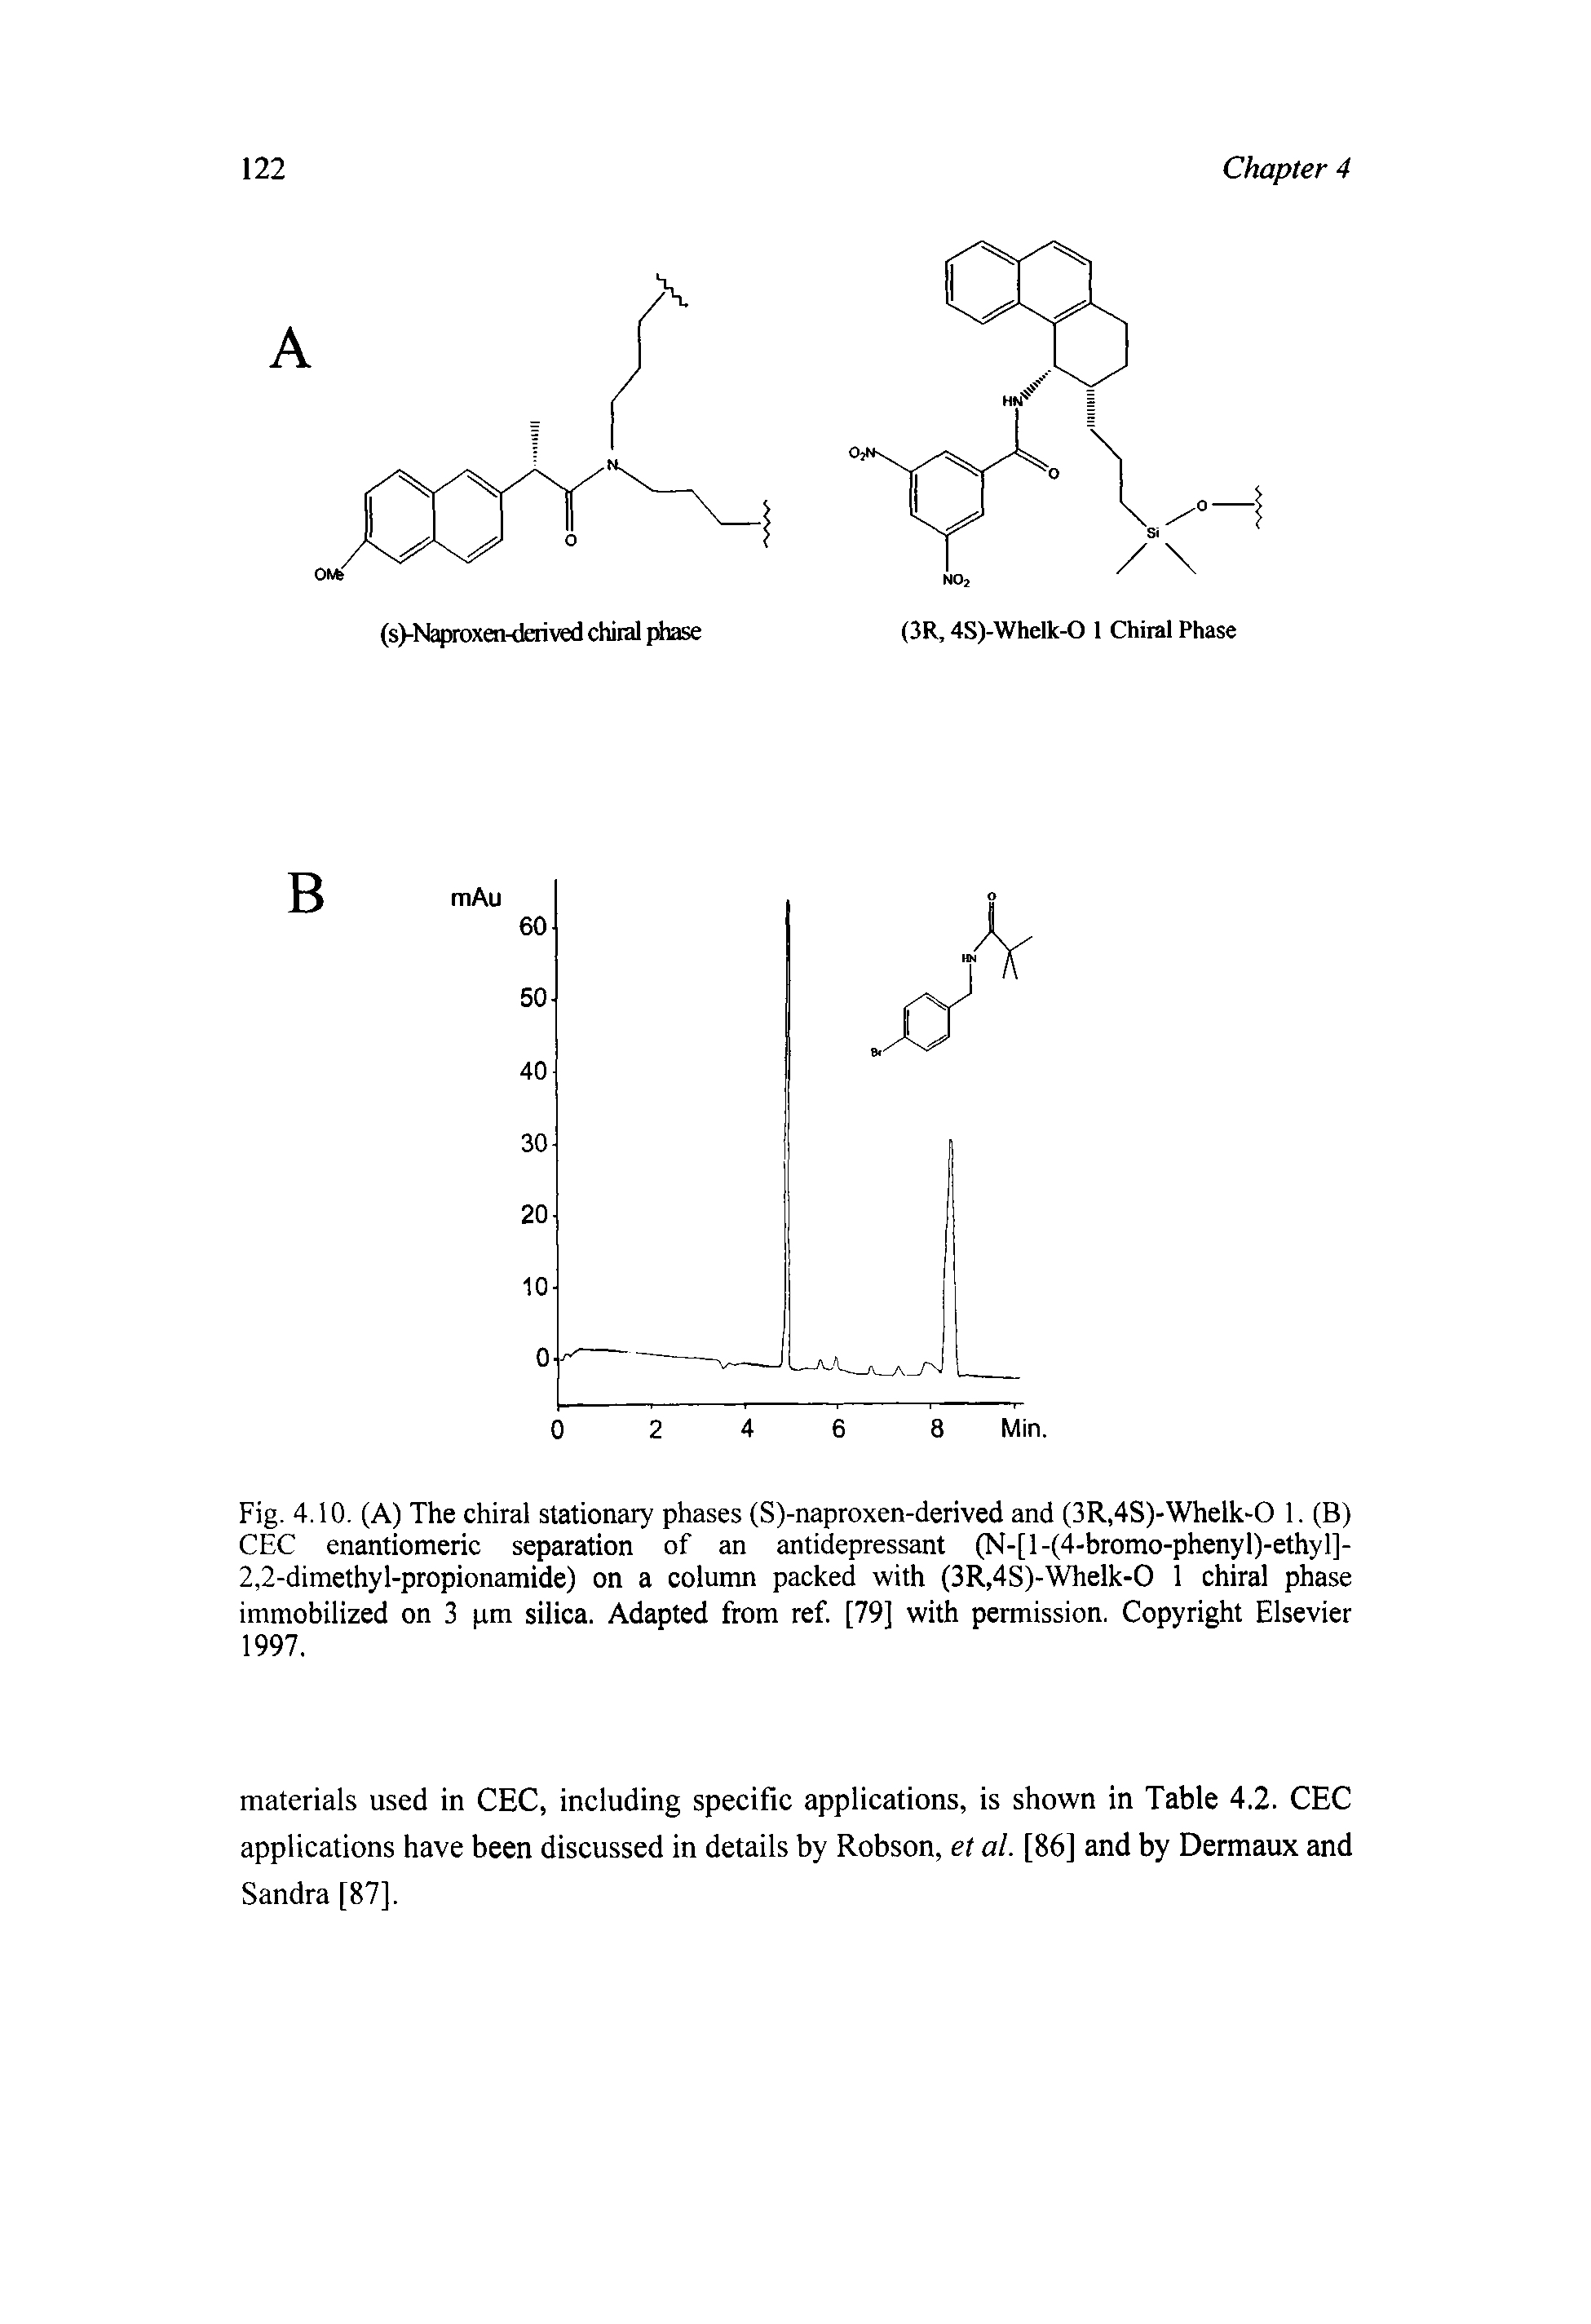 Fig. 4.10. (A) The chiral stationary phases (S)-naproxen-derived and (3R,4S)-Whelk 0 1. (B) CEC enantiomeric separation of an antidepressant (N-[l-(4-bromo-phenyl)-ethyl]-2,2-dimethyl-propionamide) on a column packed with (3R,4S)-Whelk-0 1 chiral phase immobilized on 3 pm silica. Adapted from ref. [79] with permission. Copyright Elsevier 1997.